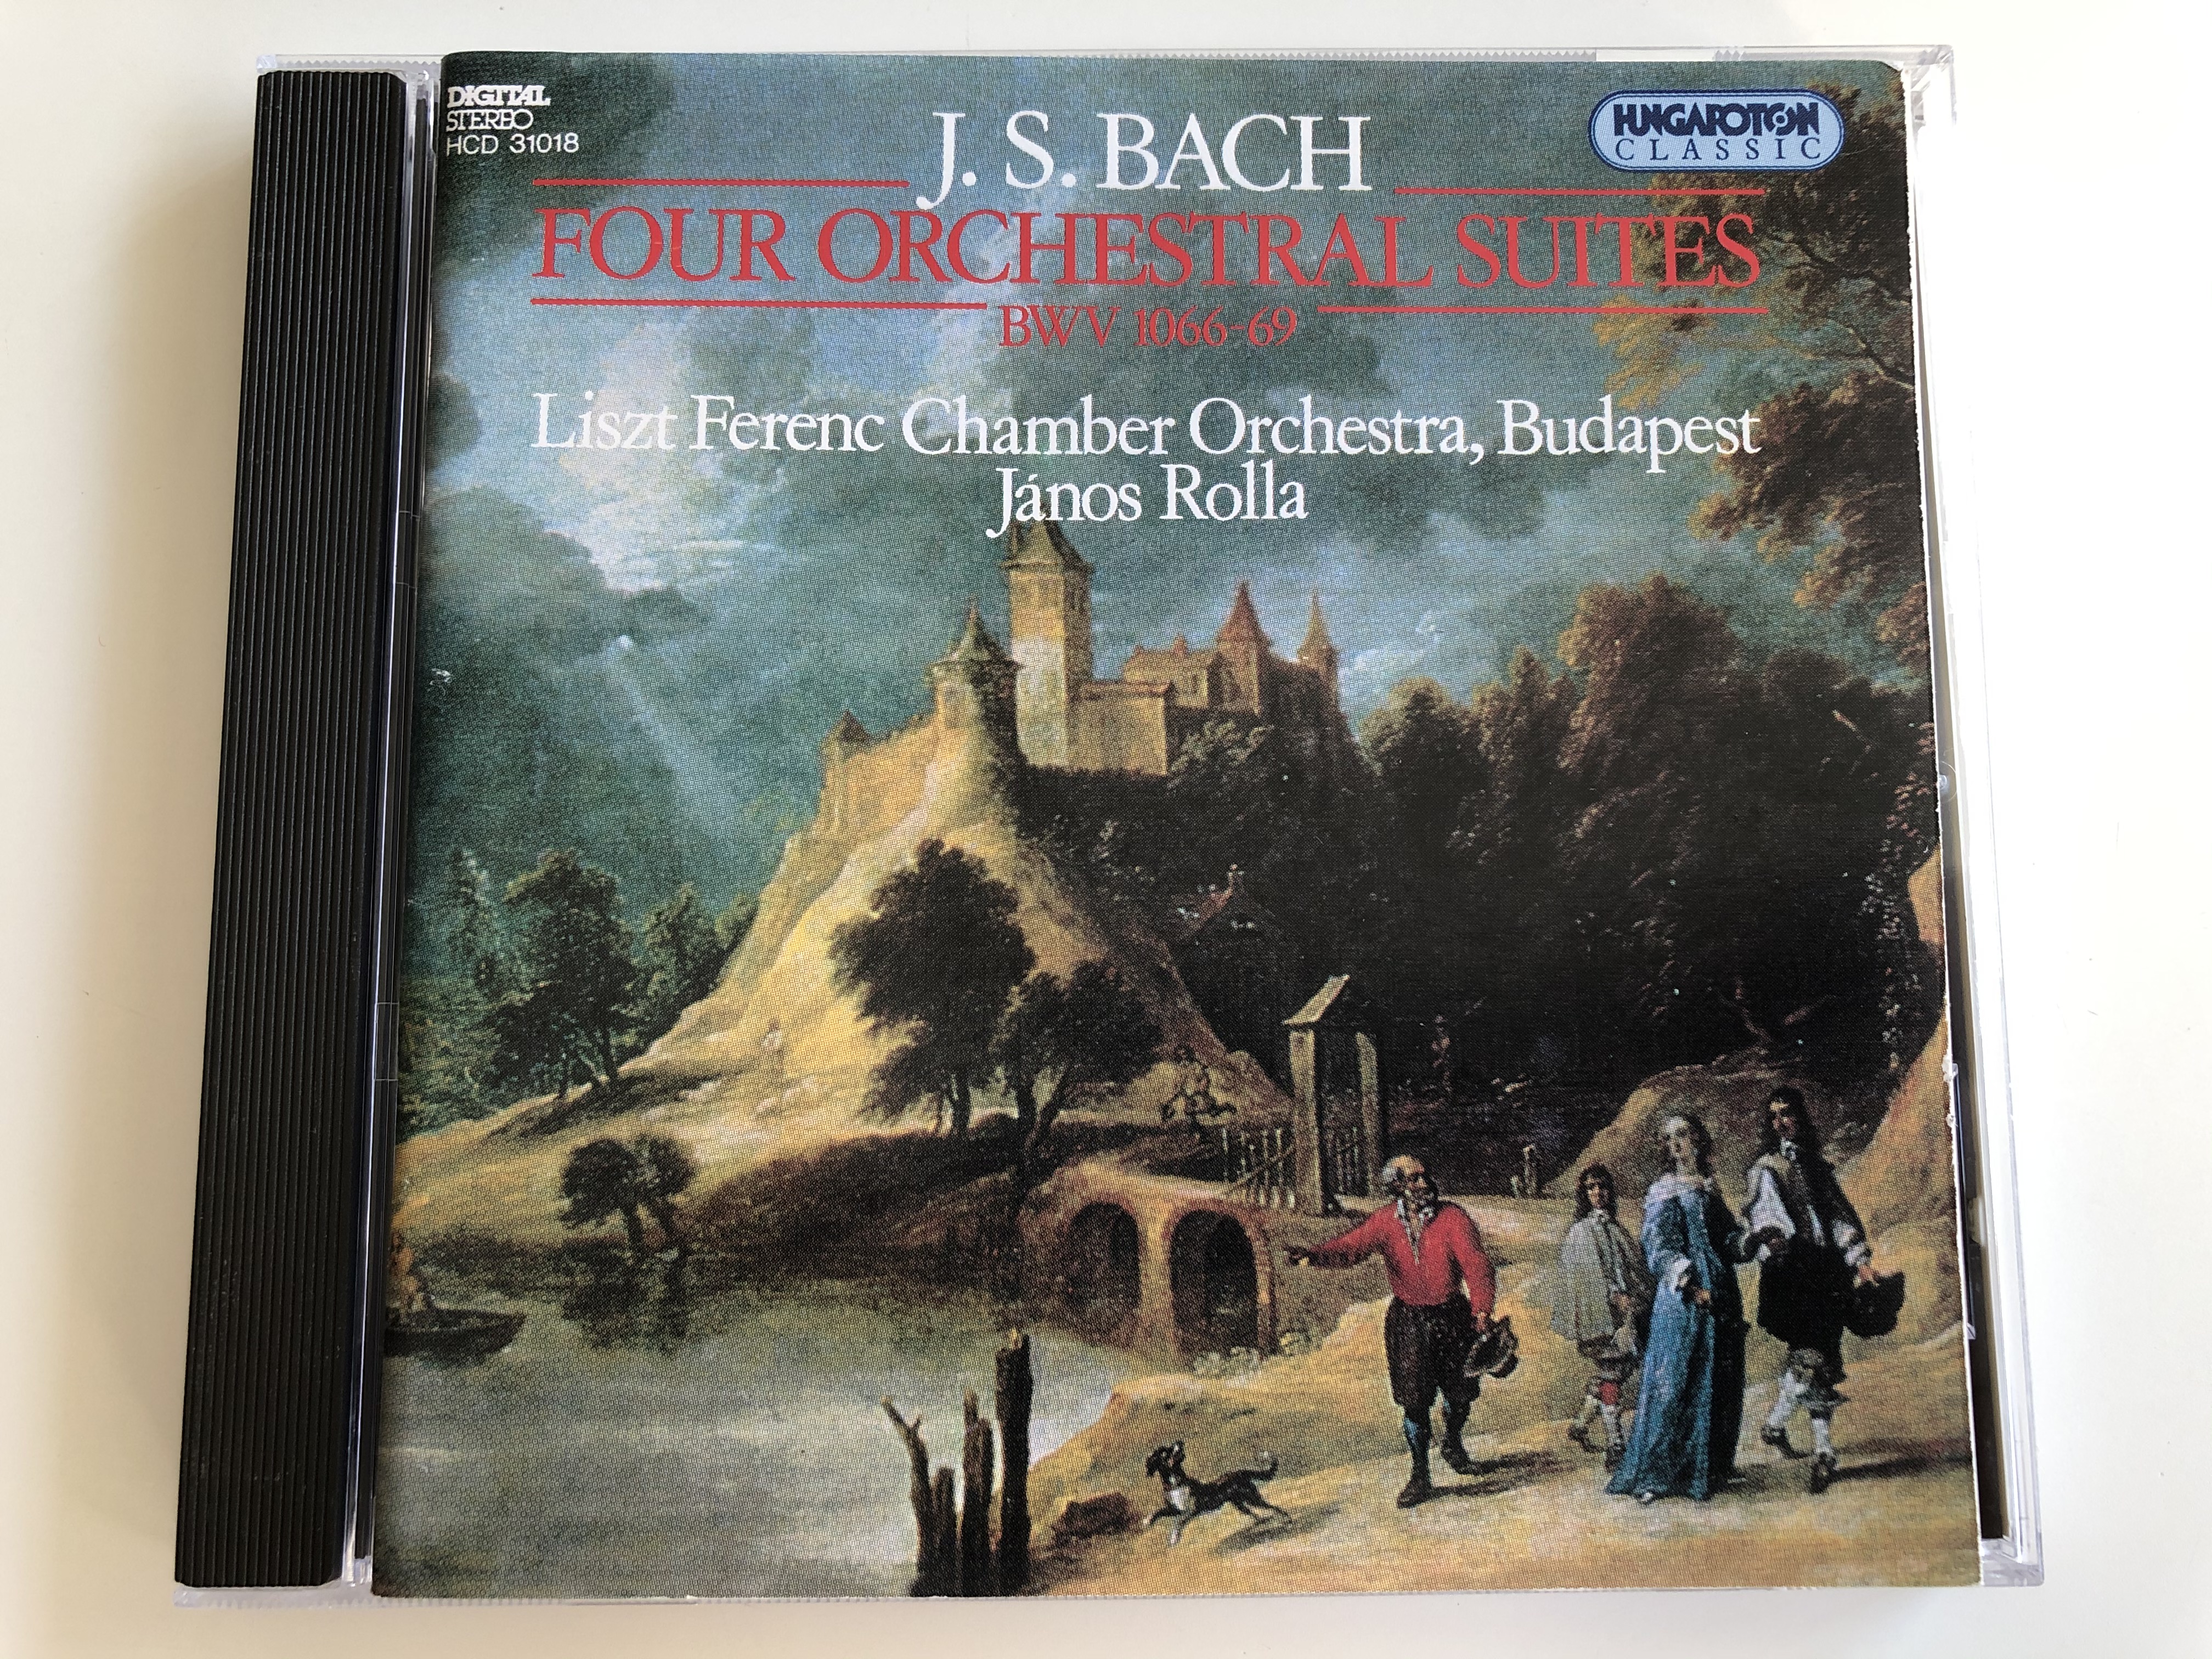 j.-s.-bach-four-orchestral-suites-bwv-1066-69-liszt-ferenc-chamber-orchestra-budapest-janos-rolla-hungaroton-classic-audio-cd-1994-stereo-hcd-31018-1-.jpg